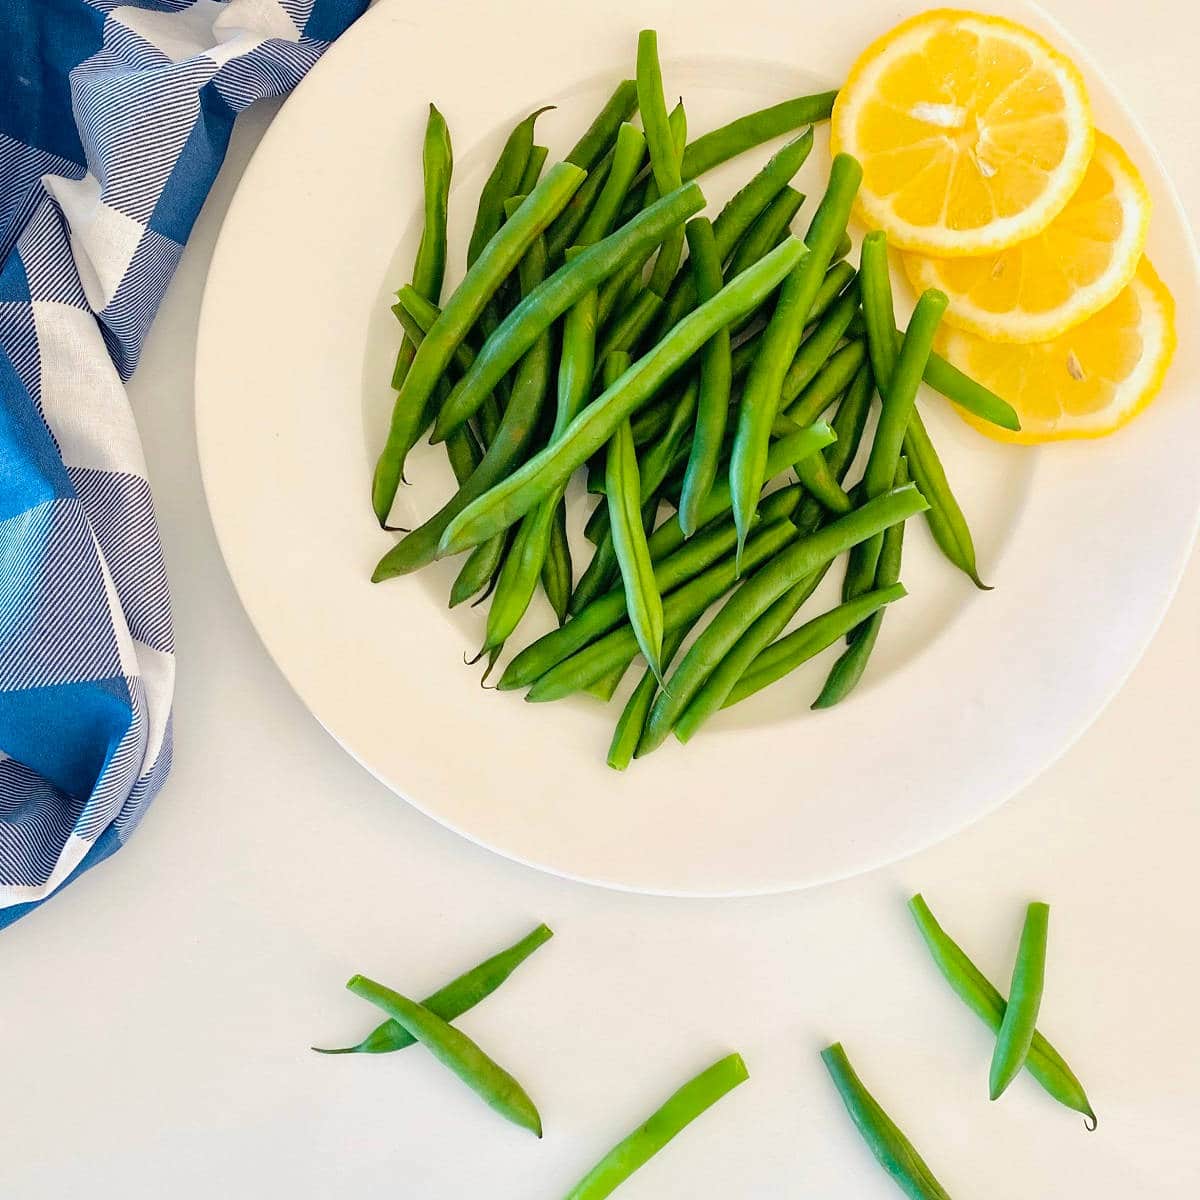 green beans on a plate next to lemon slices and a blue checkered cloth napkin